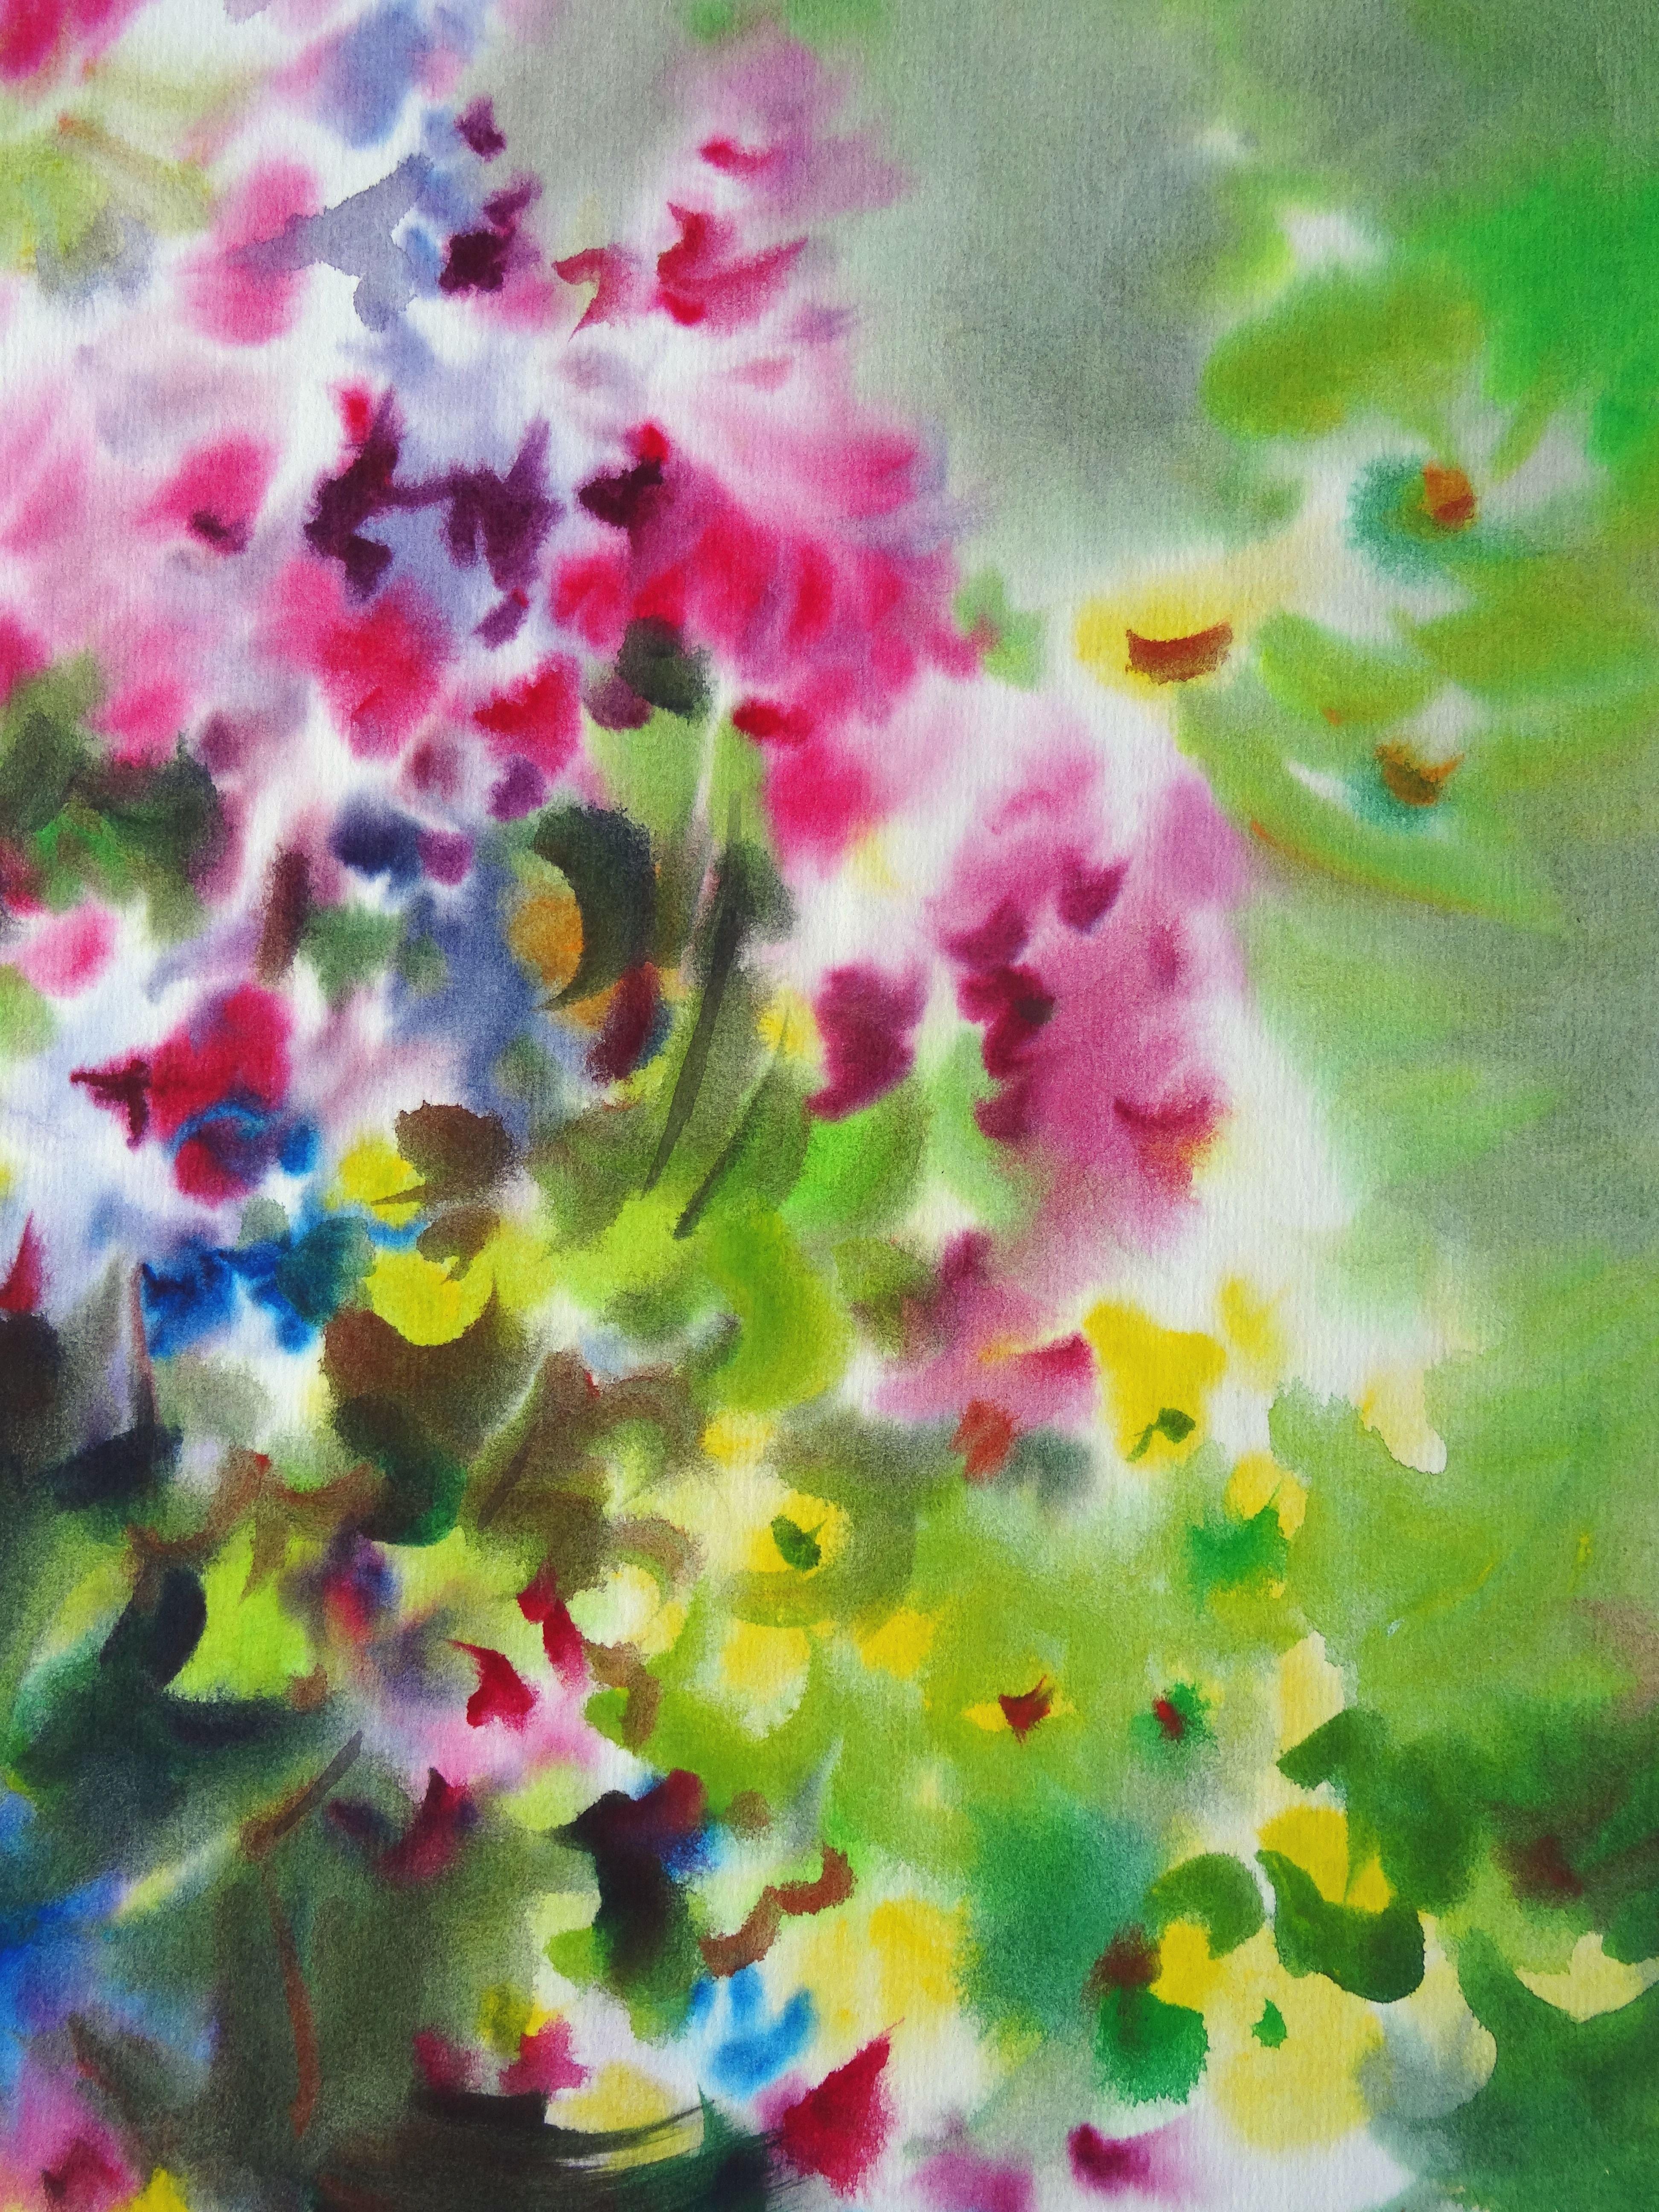 Bright summer flowers. 2020. Watercolor, paper, 74 x 59 cm - Gray Still-Life Painting by Zigmunds Snore 